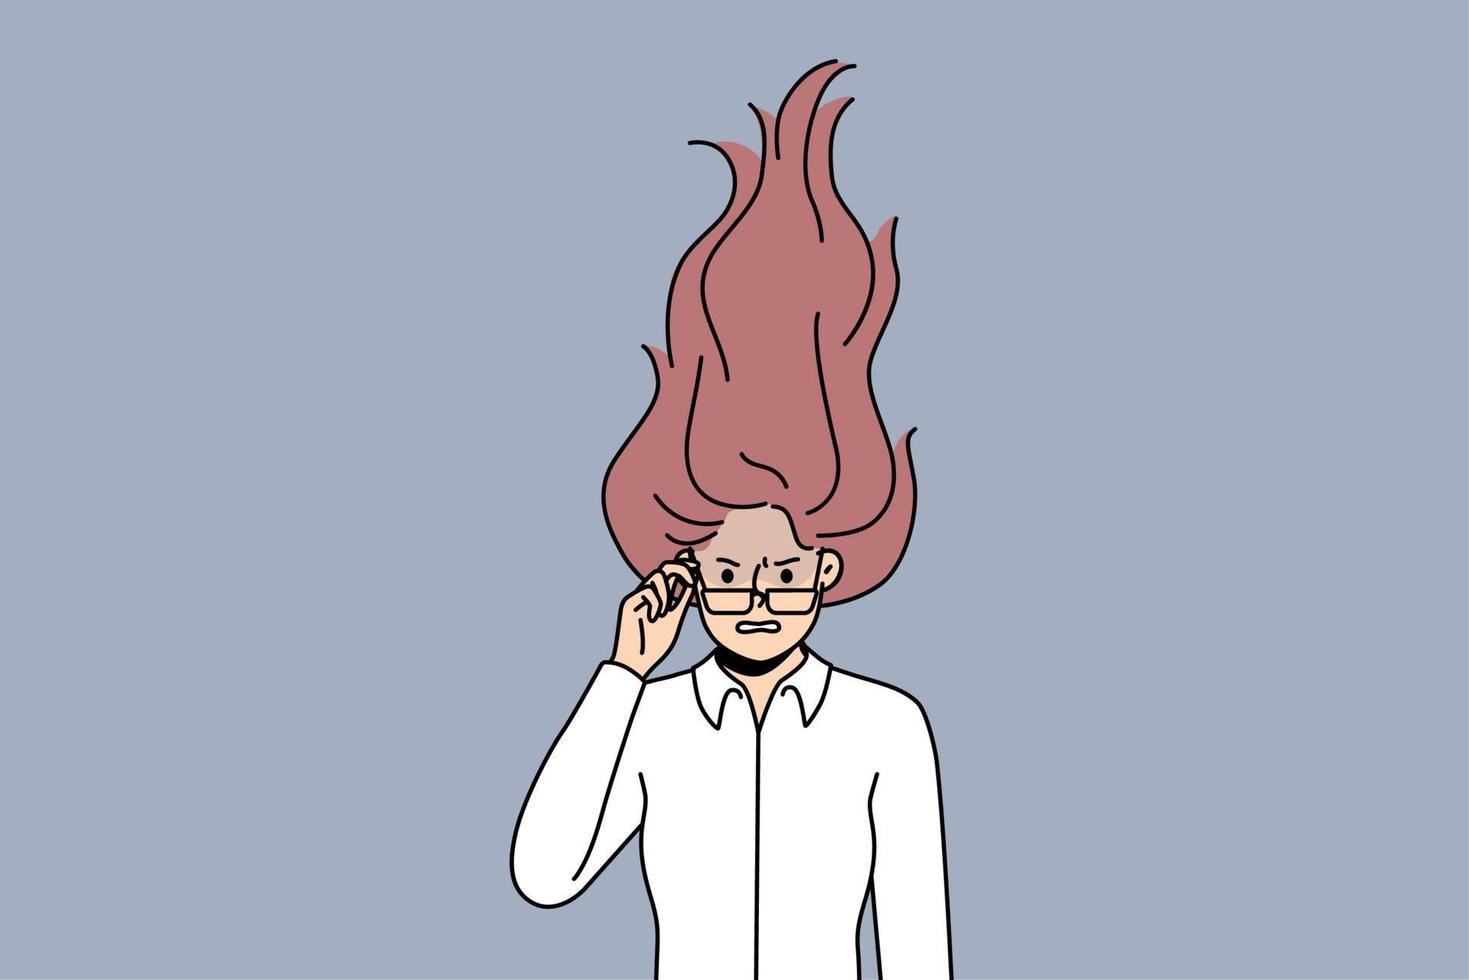 Furious young woman with hair in fire flames suffer from work burnout. Mad businesswoman struggle with emotional breakdown or overwork. Vector illustration.